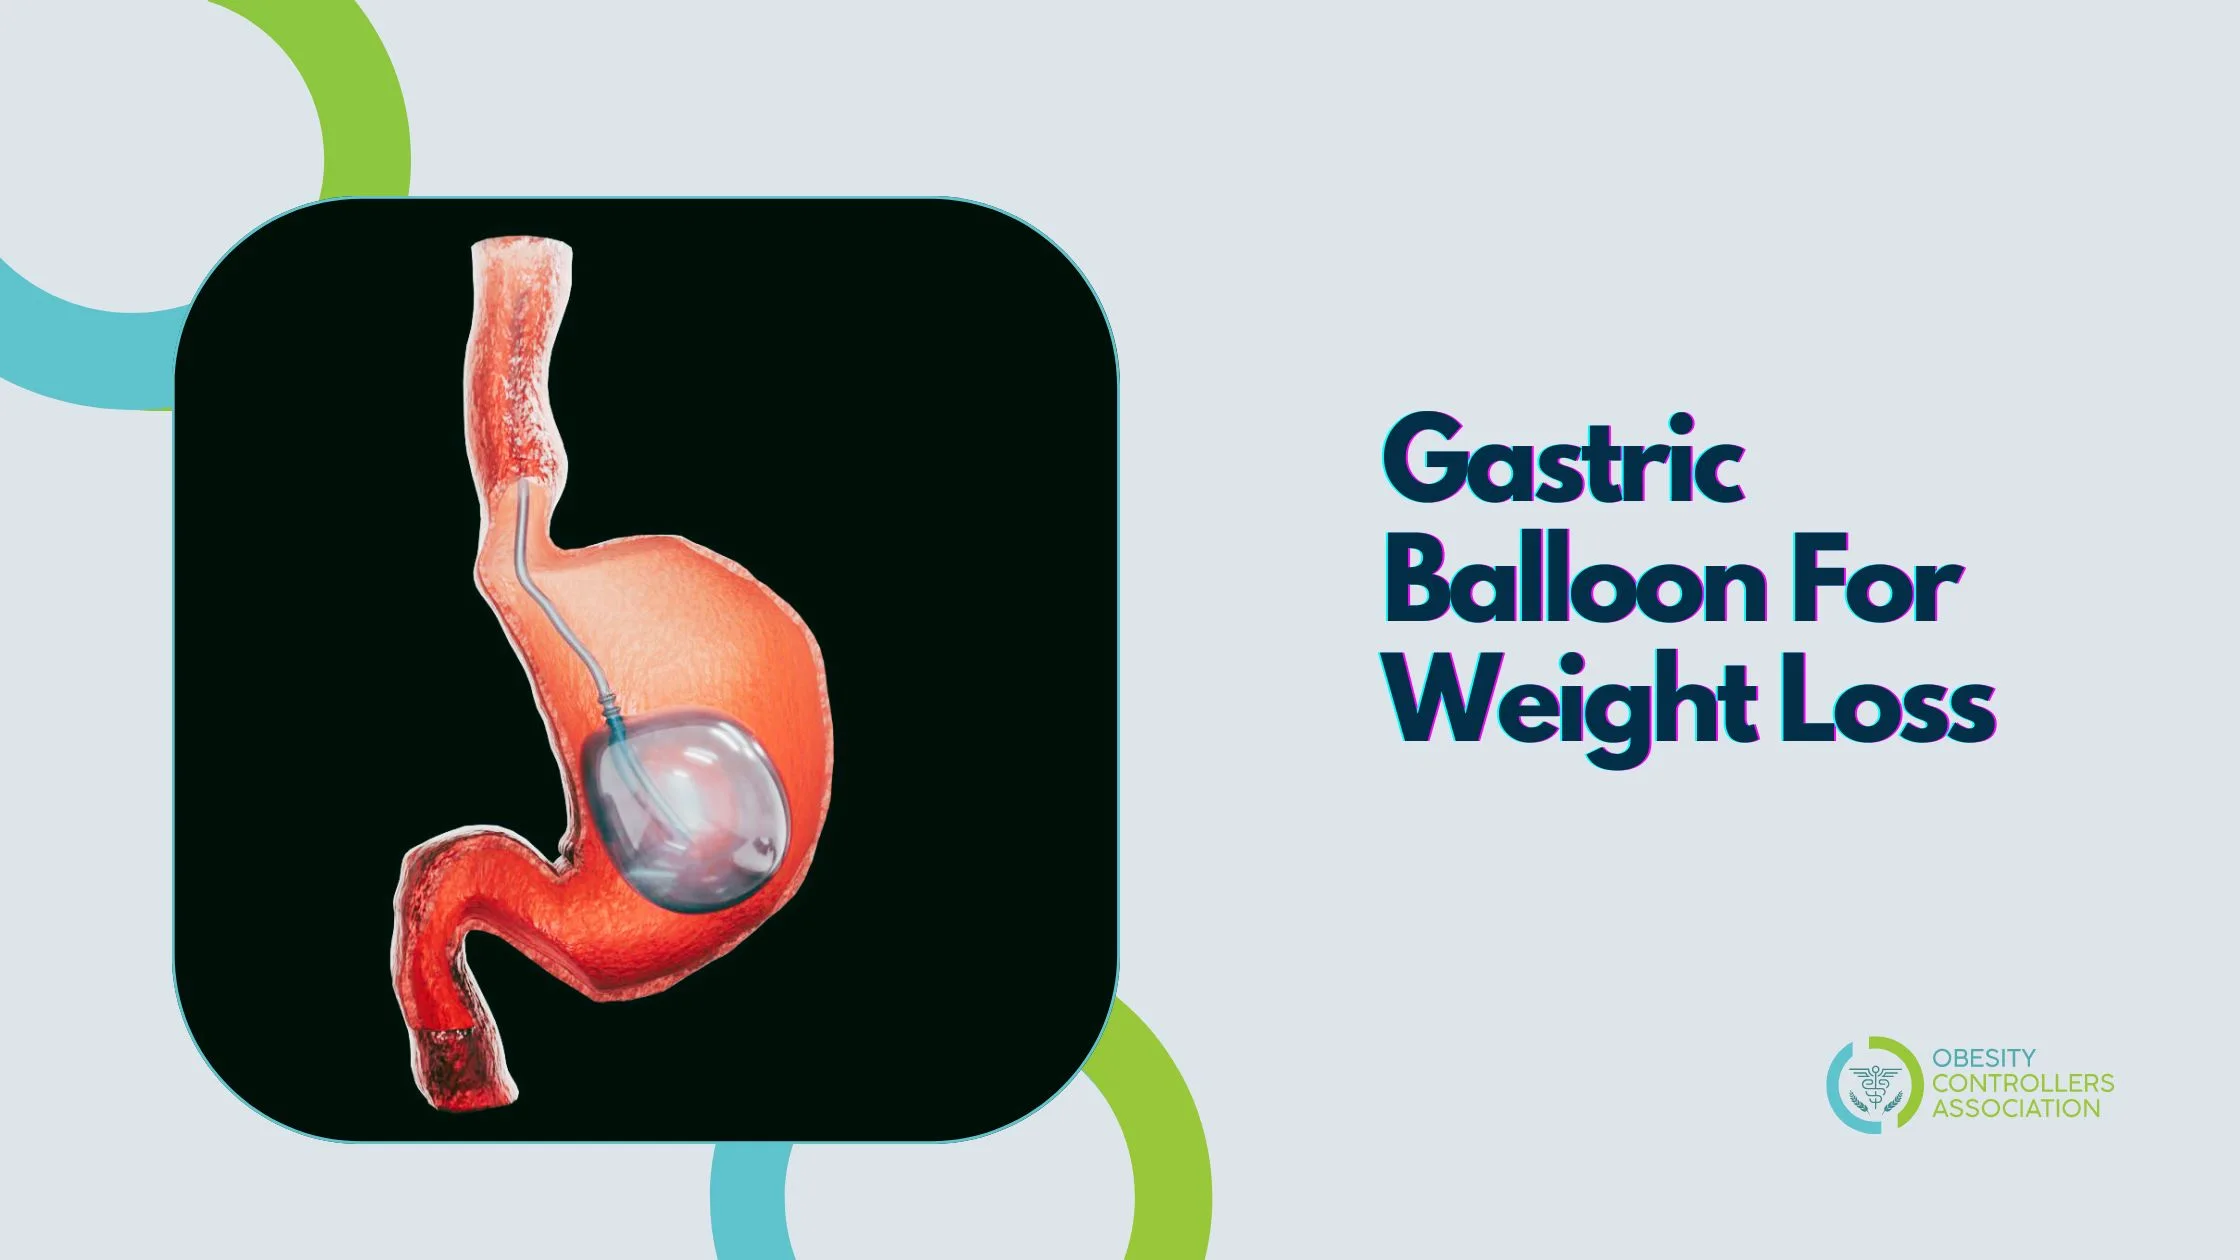 Gastric Balloon Works To Aid Weight Loss